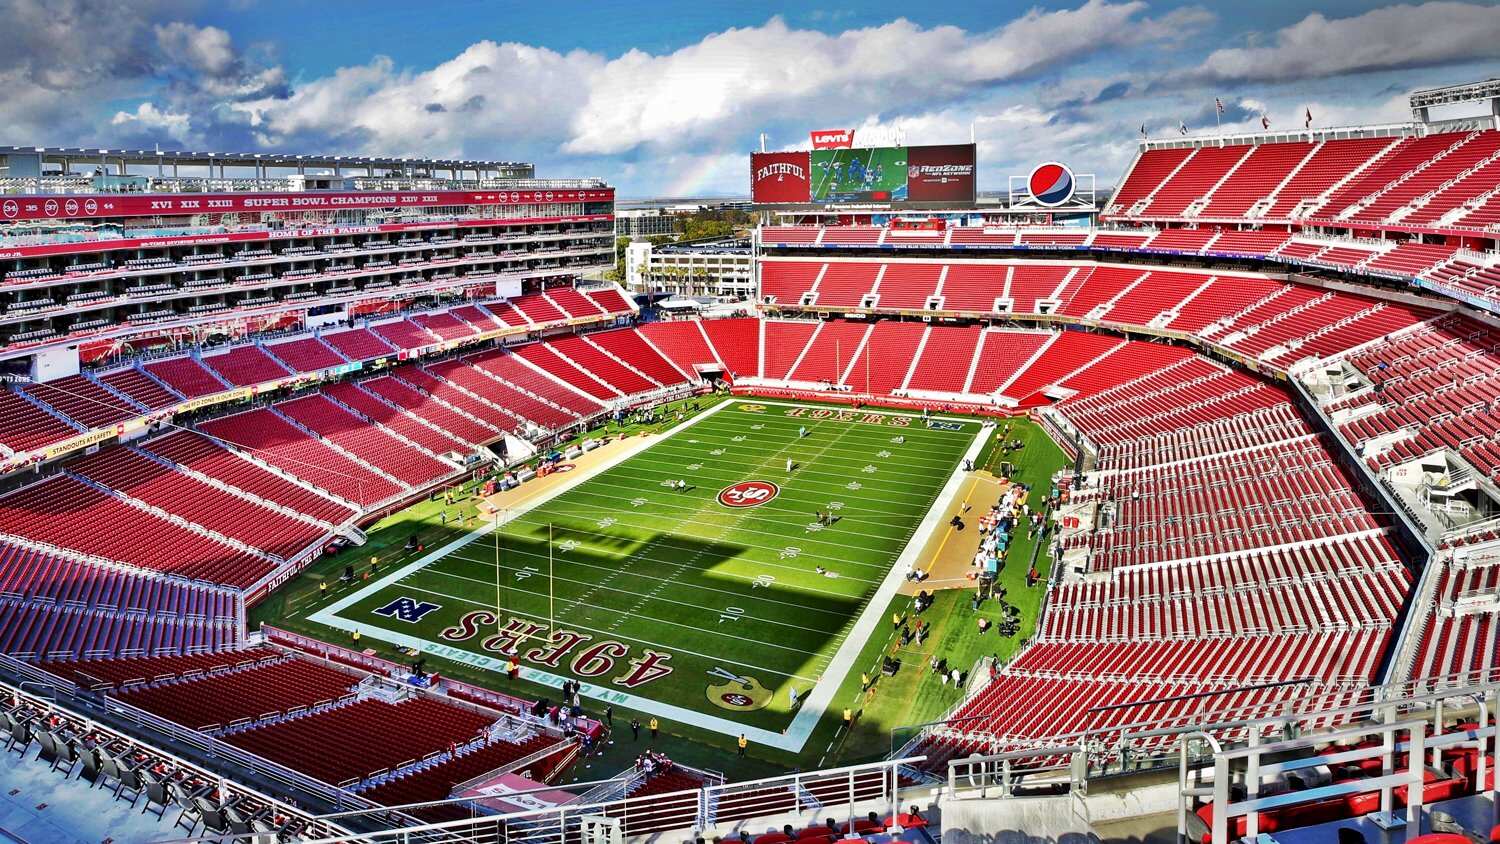 12 Fascinating Facts About Levi's Stadium - Facts.net